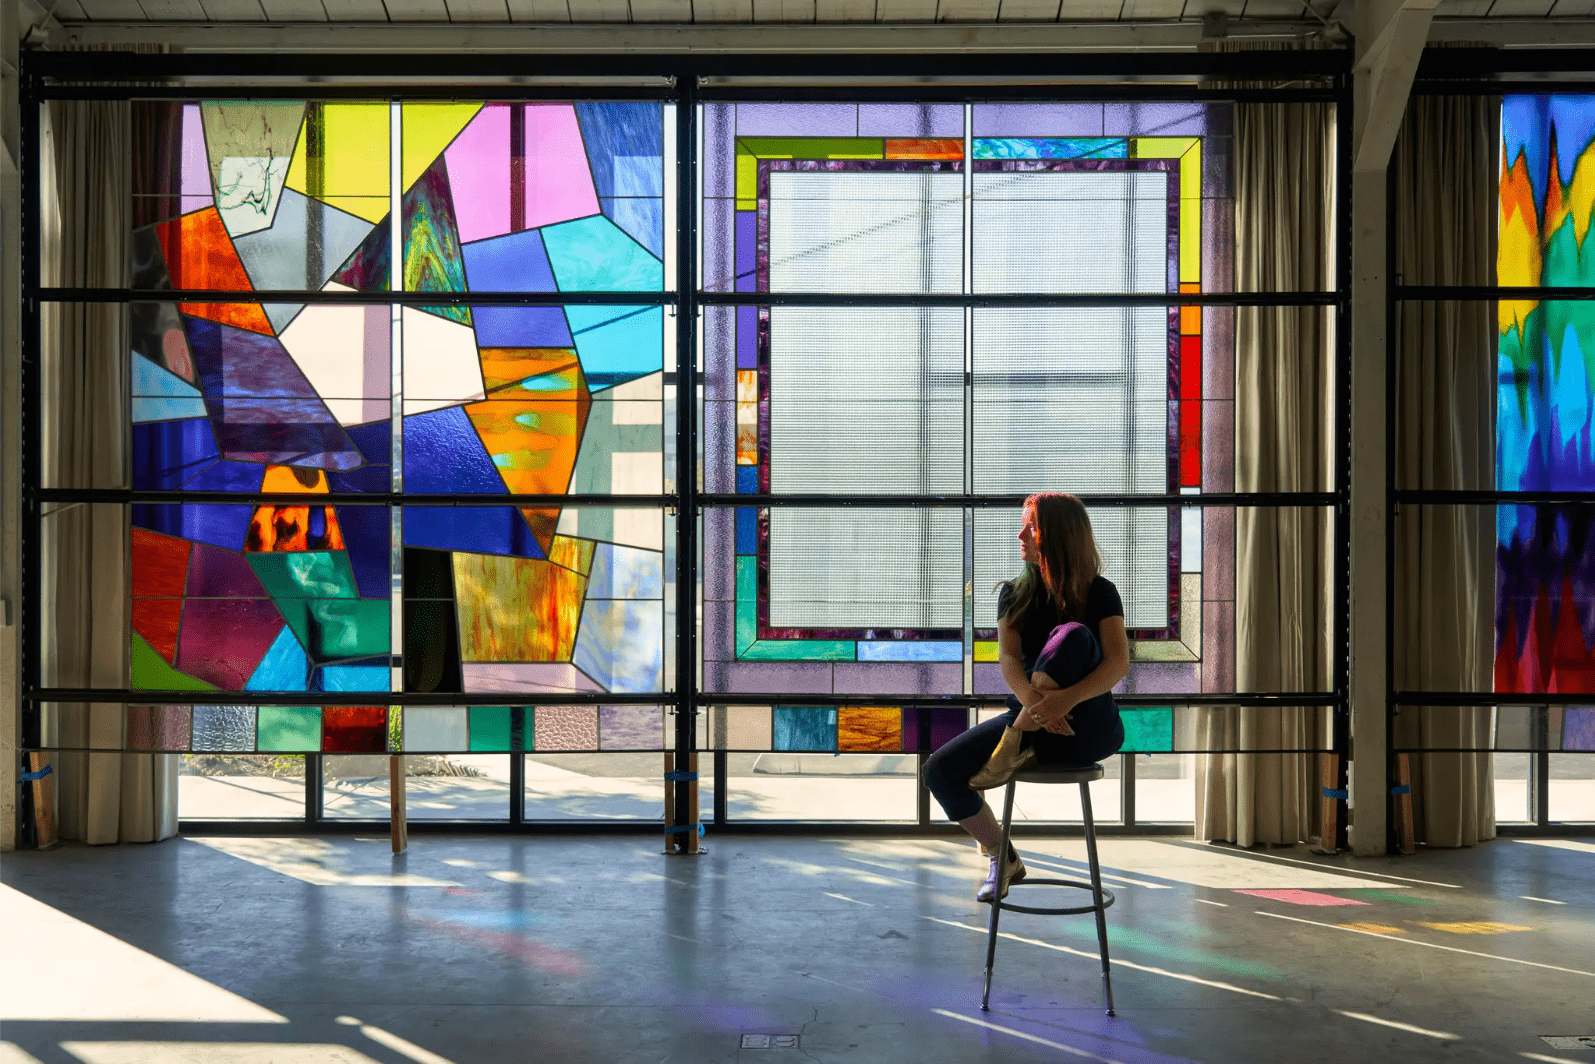 New York Times: The Artist Creating a 150-Foot-Long Glass Rainbow